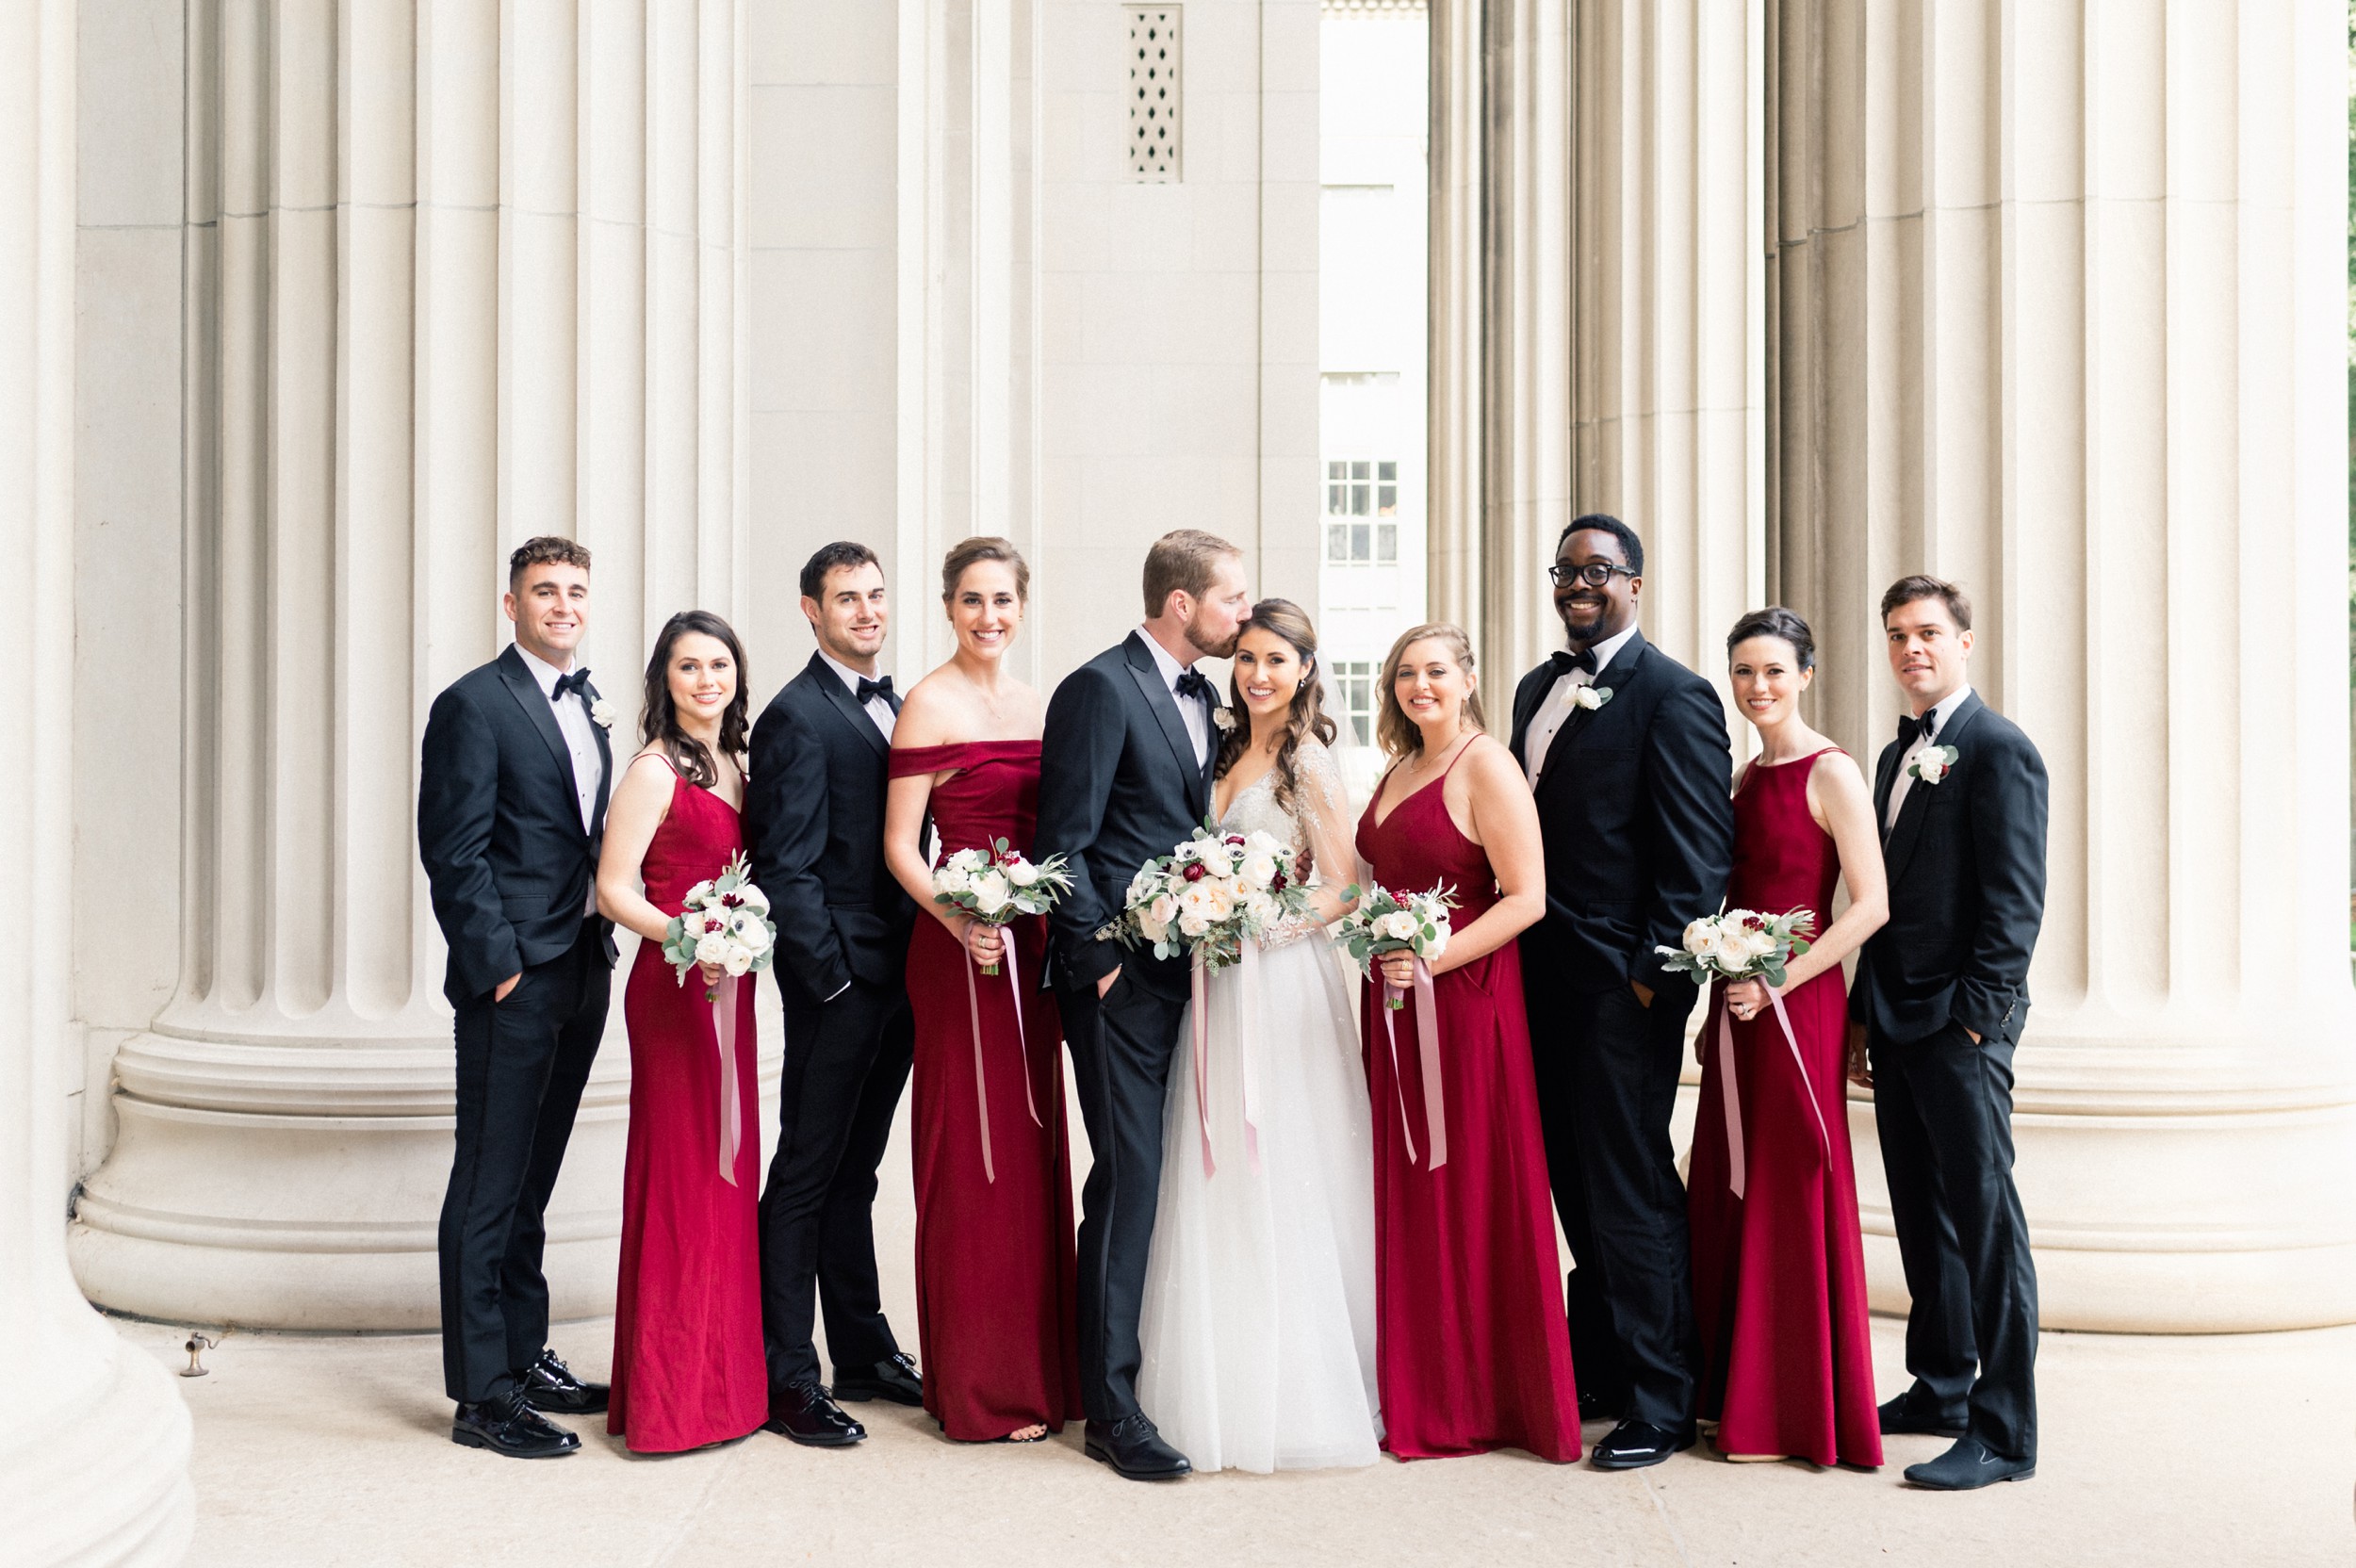 fall wedding at Harvard art museum bridal party in cranberry dresses and tuxedos